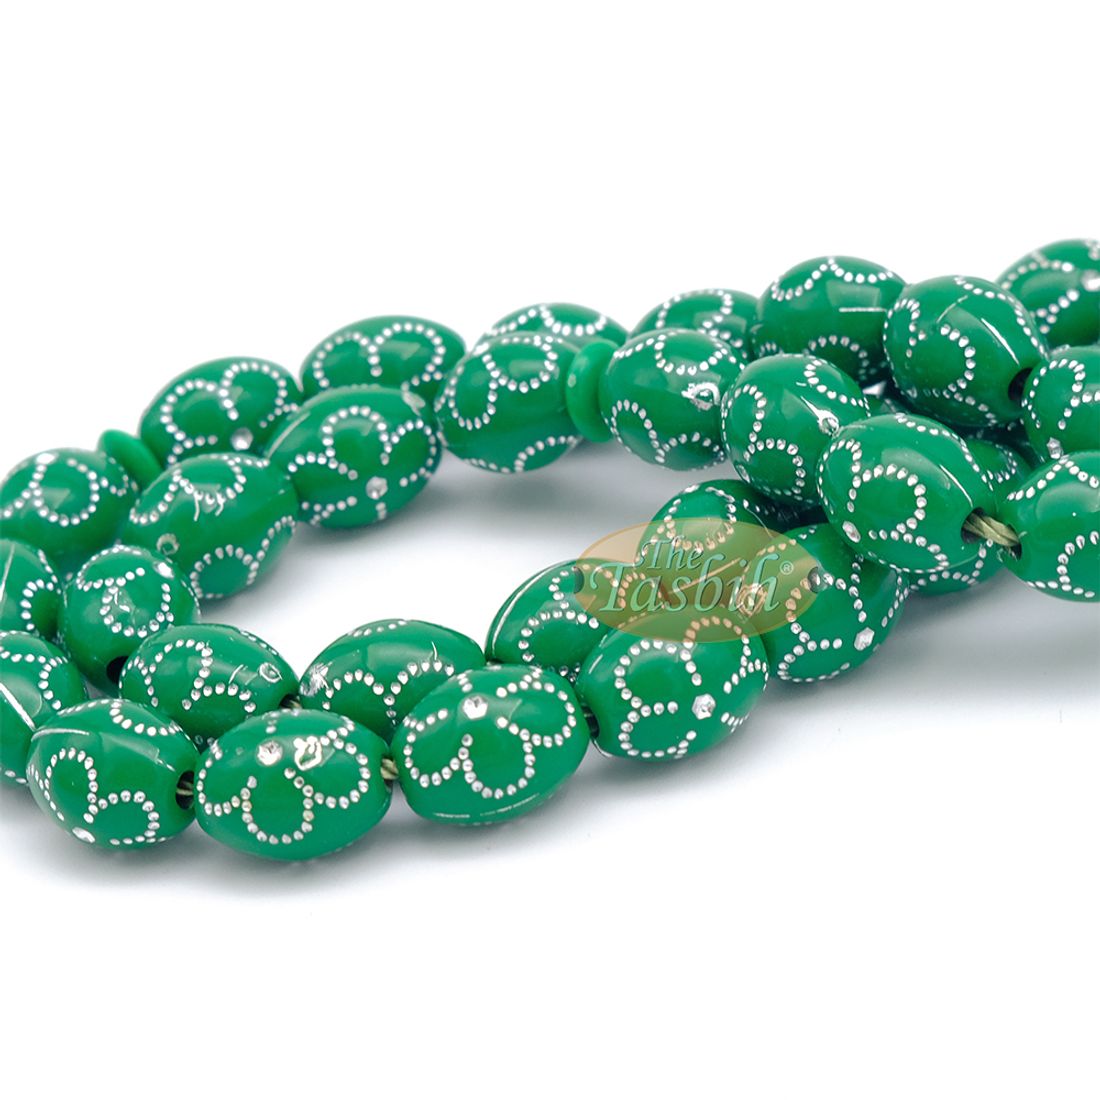 Large Green Tasbih 11×14-mm Plastic Resin Electroplated Silver-tone Flower Design 33-ct Prayer Dhikr Beads